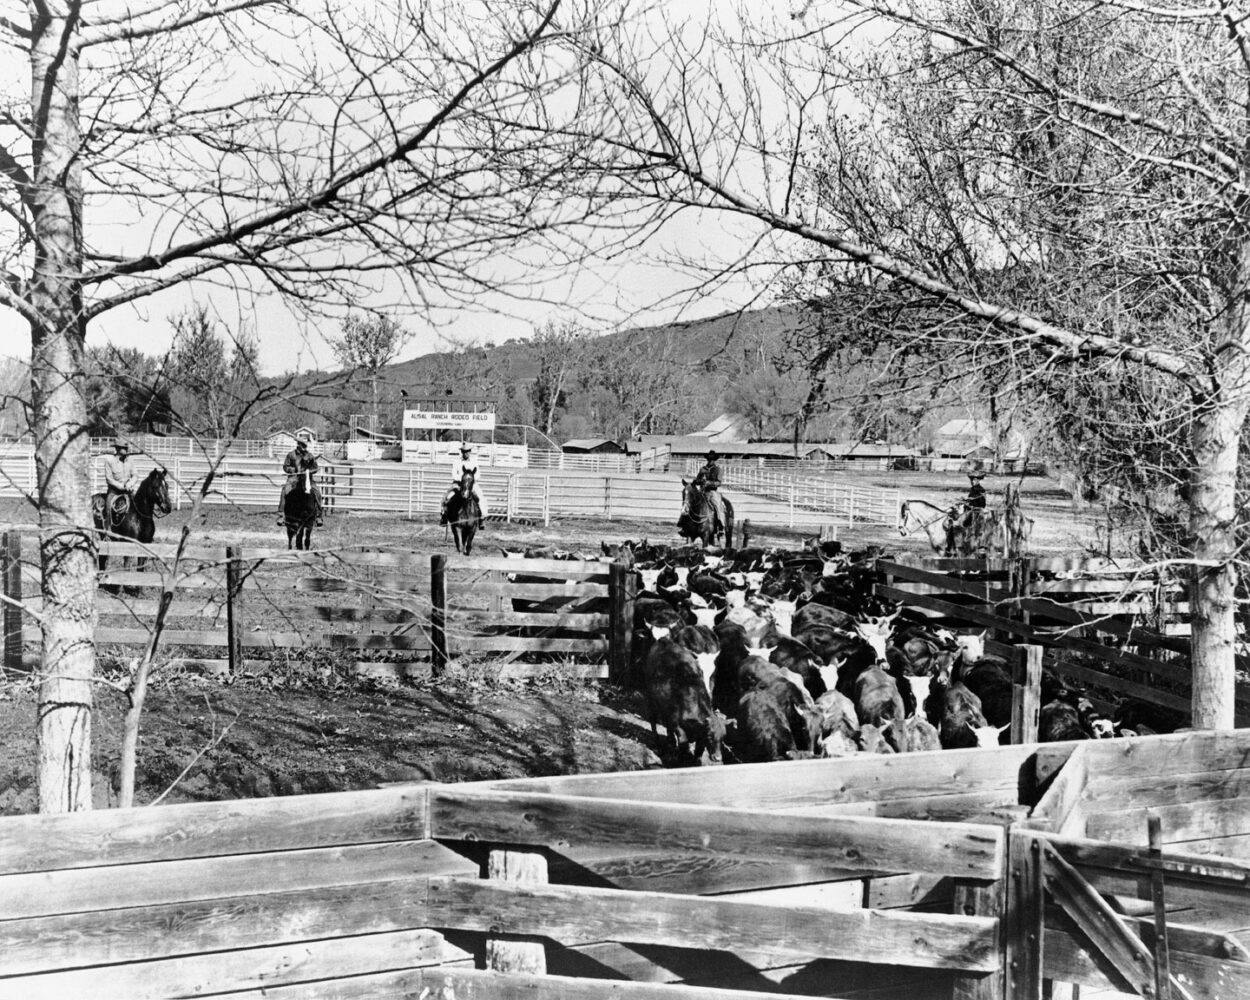 historical photo of cattle going into a fenced area with cowboys on horses